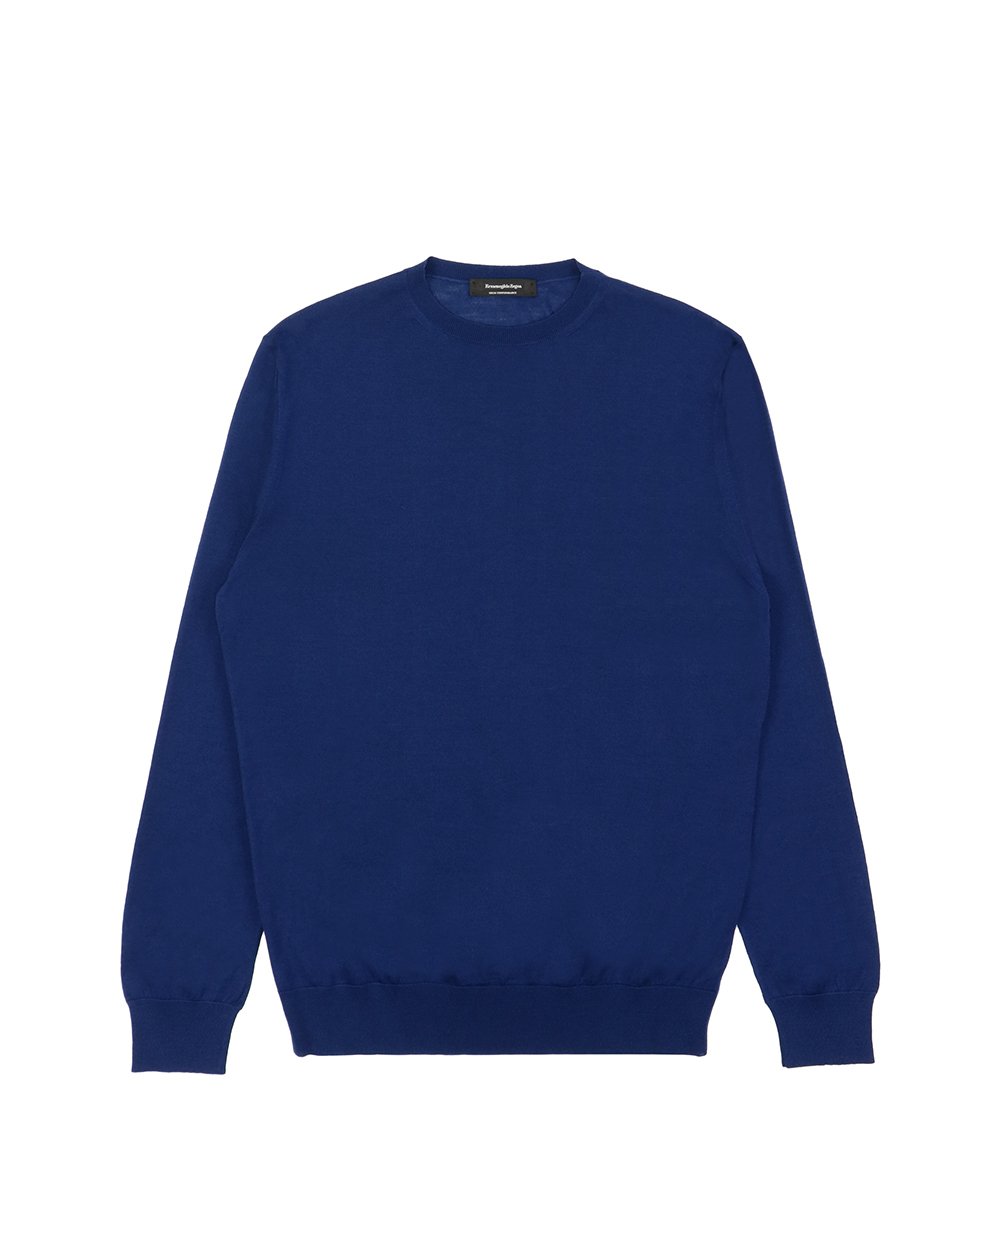 Cotton Long Sleeves Crew Neck Sweatshirt - ISSI Outlet